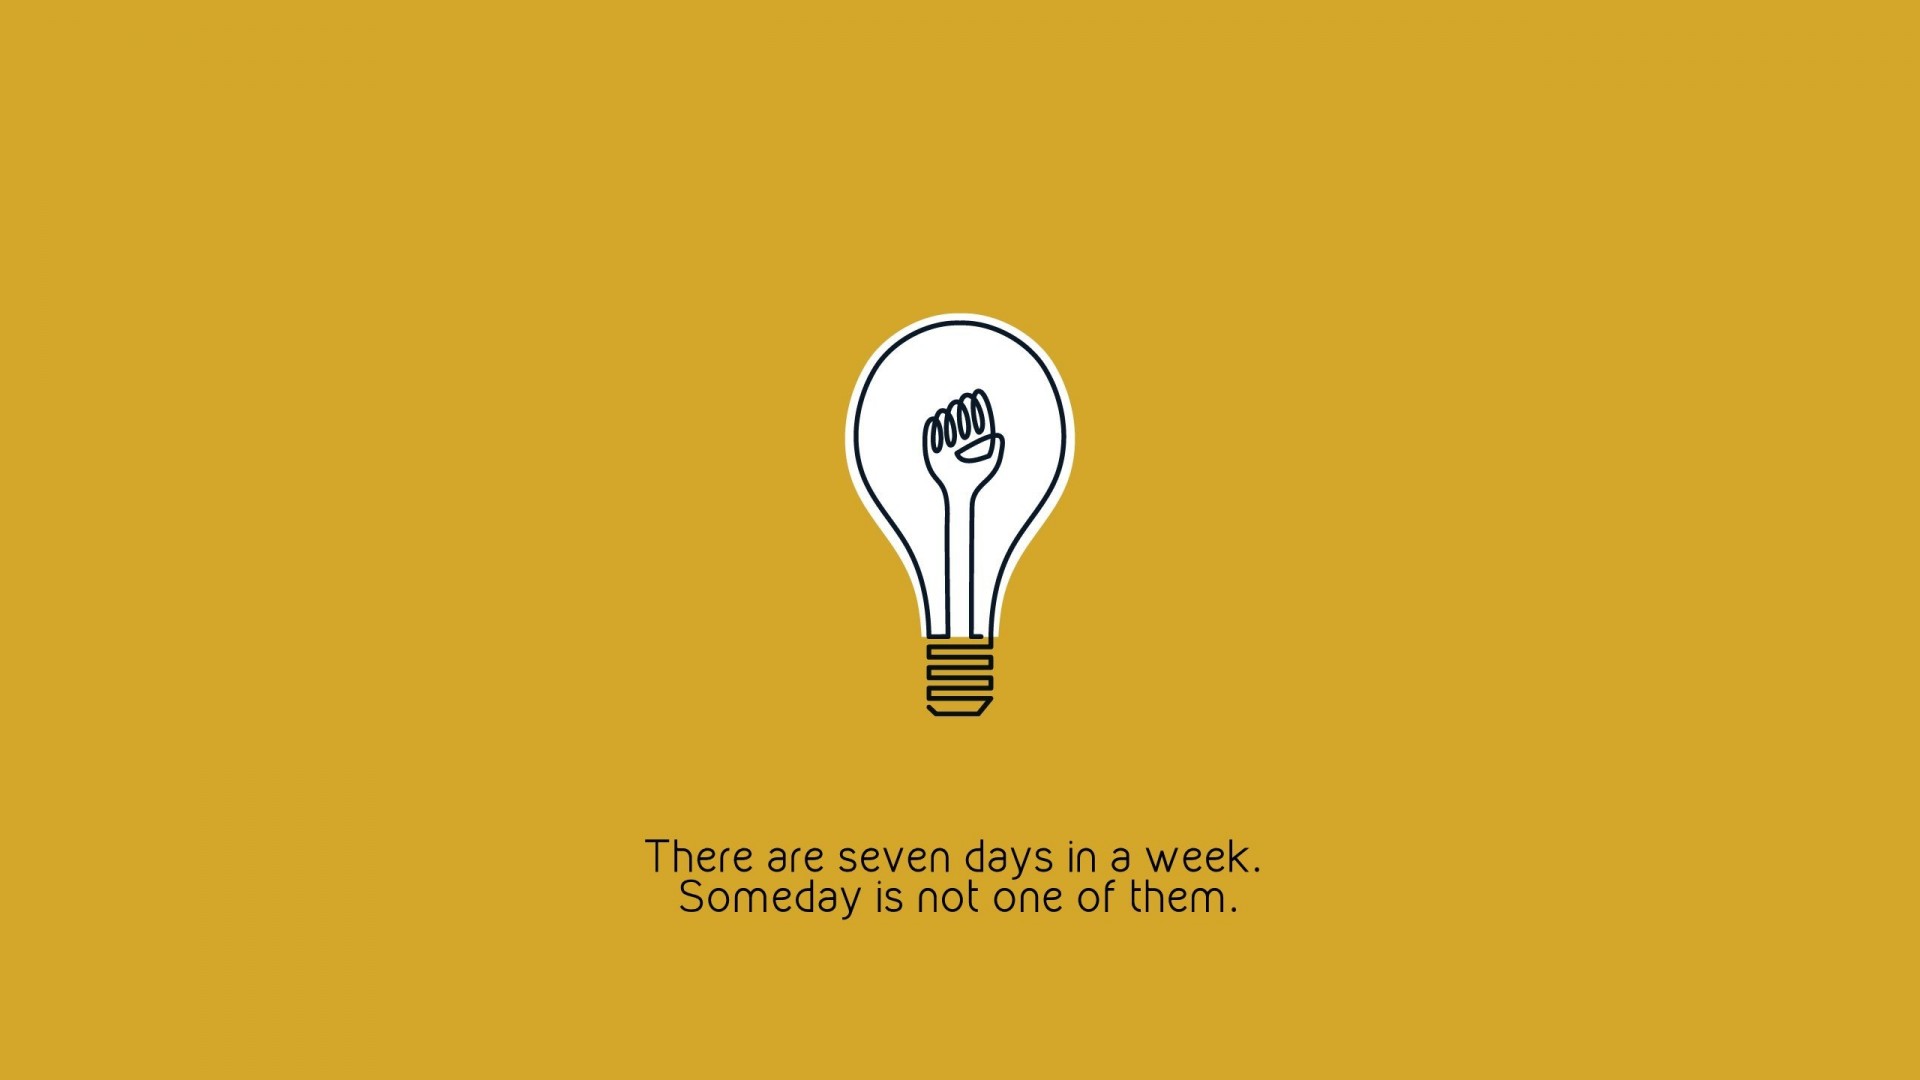 There are only 7 days in the week Wallpaper for Desktop 1920x1080